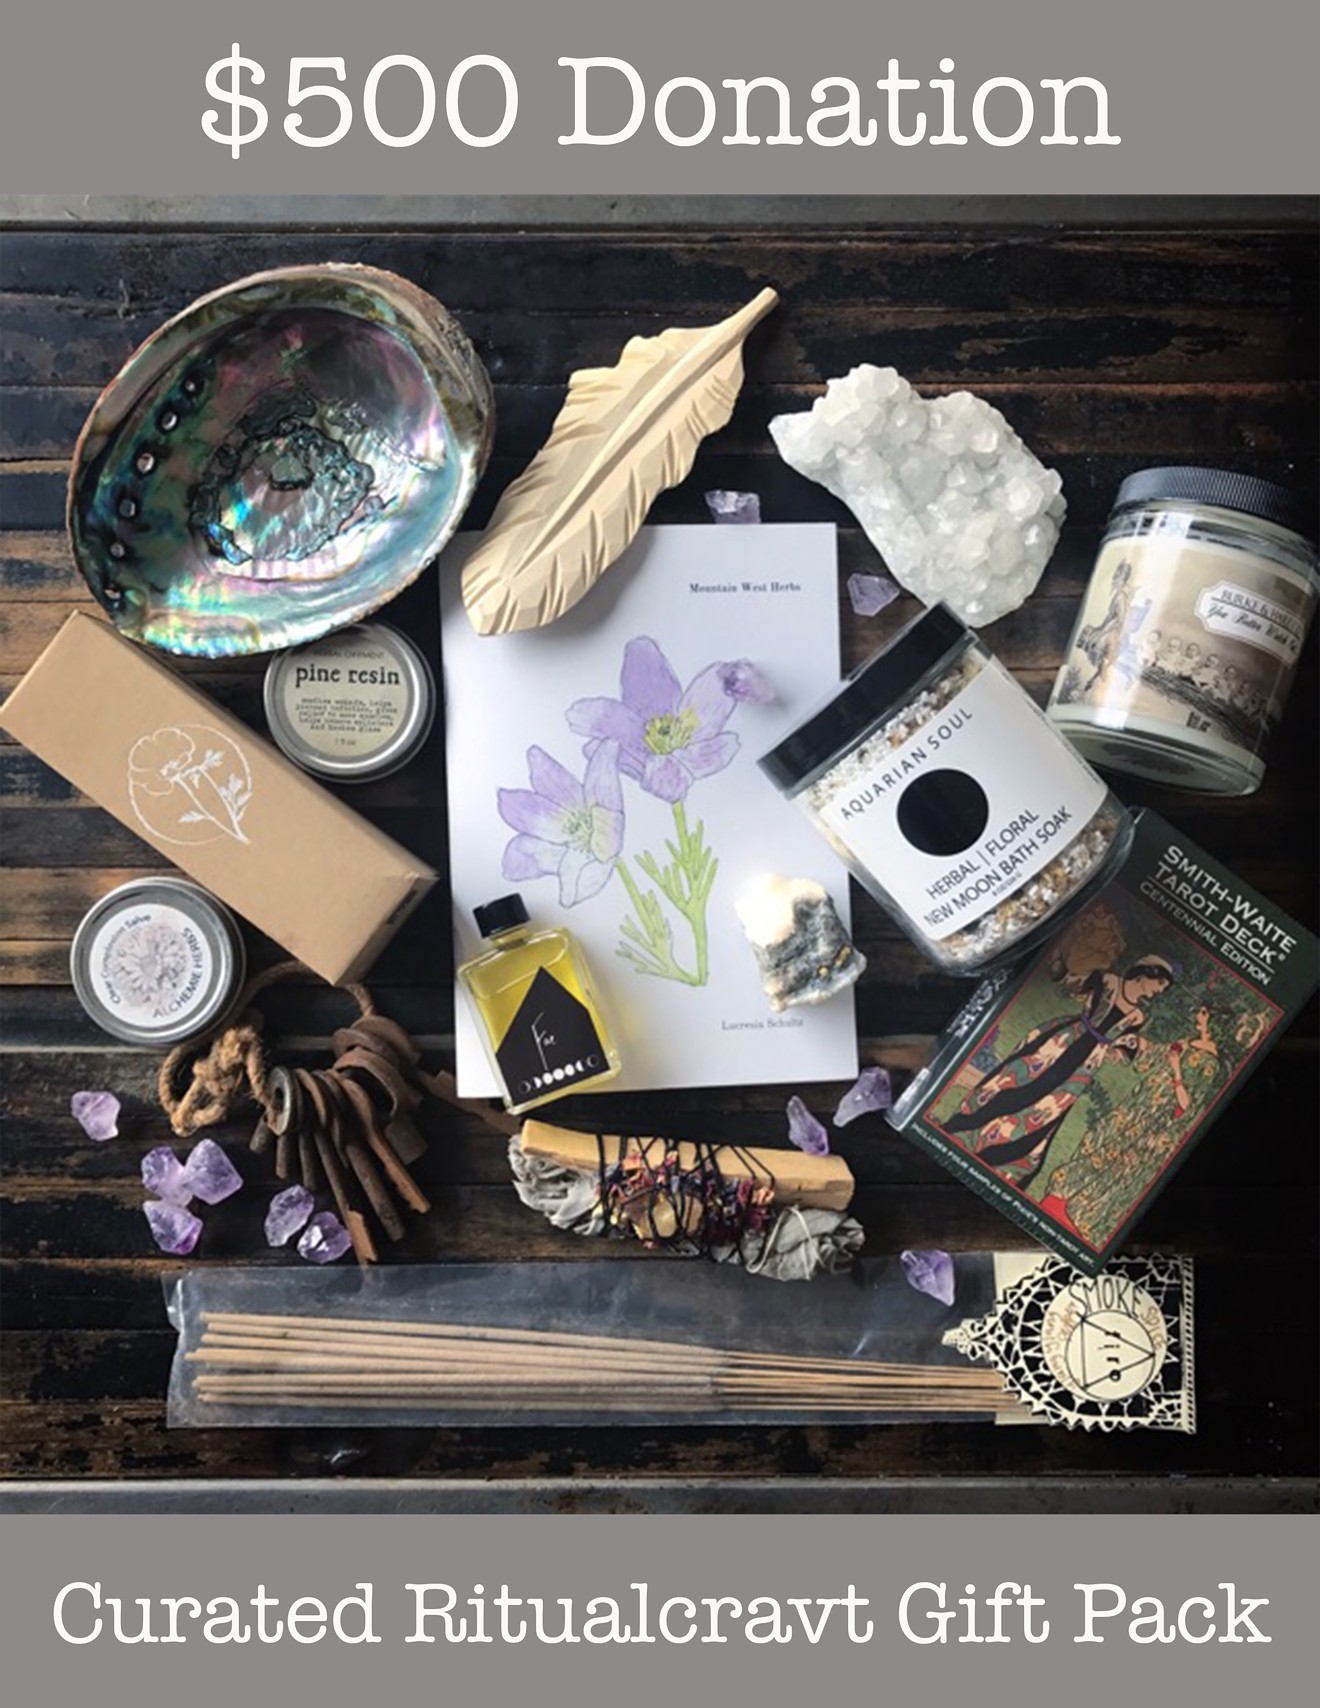 Incentives for donating include a dreamy, crystal-filled gift pack from Ritualcravt.